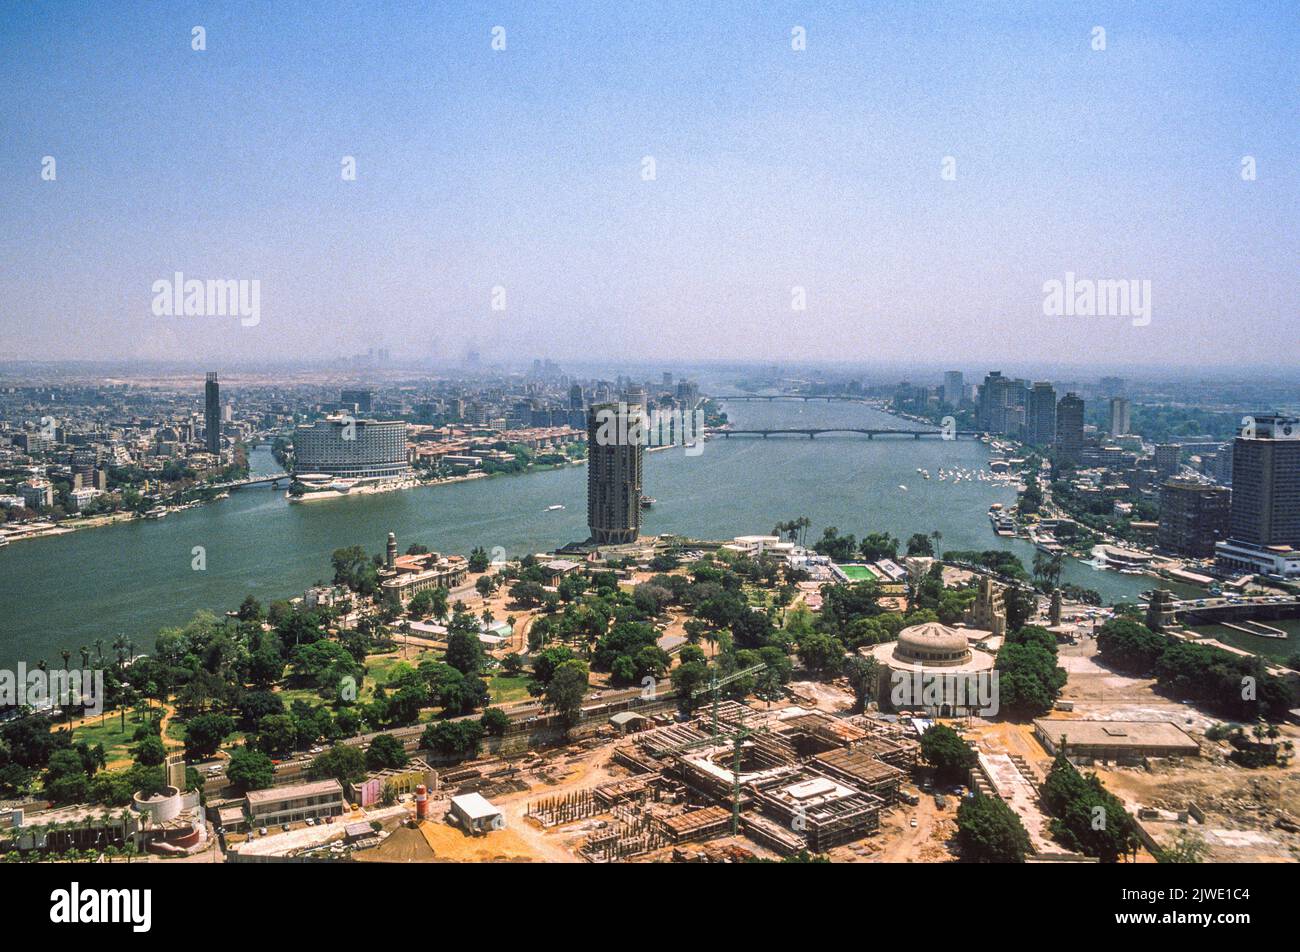 A southern view of Cairo from the Cairo Tower with the Opera House under construction, Egypt Stock Photo